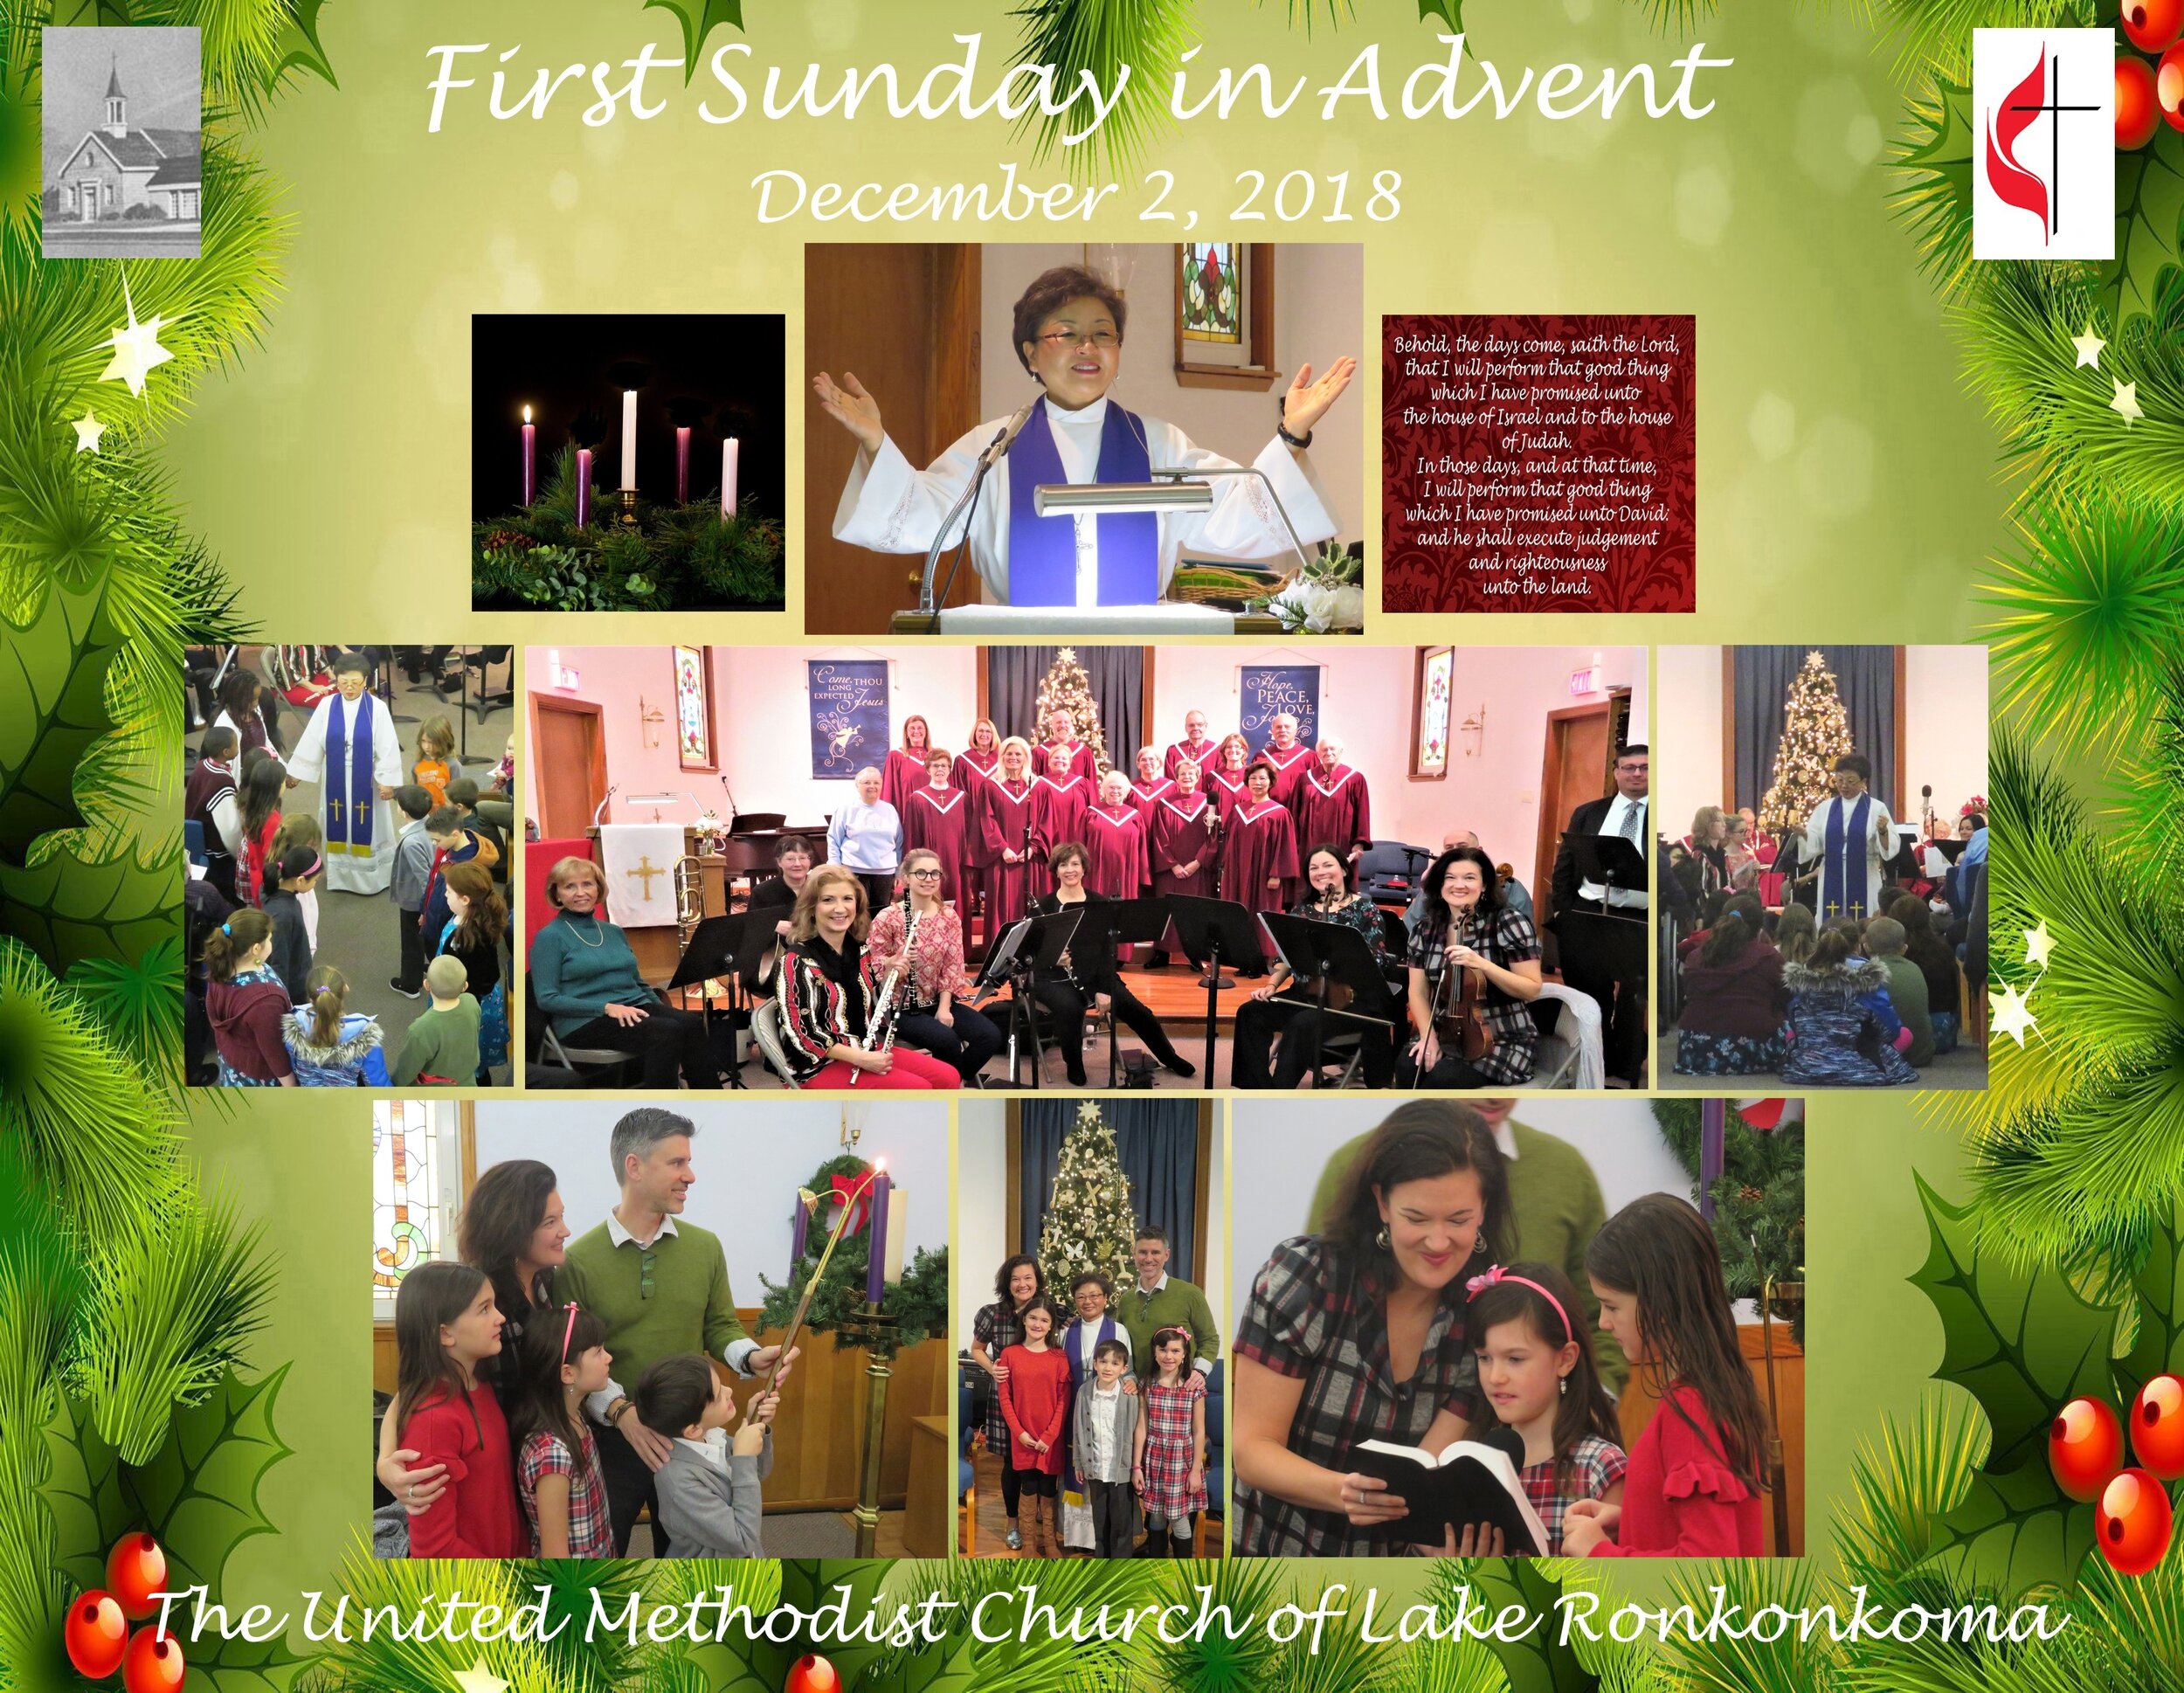 35-2018-12-02 First Sunday in Advent.jpg